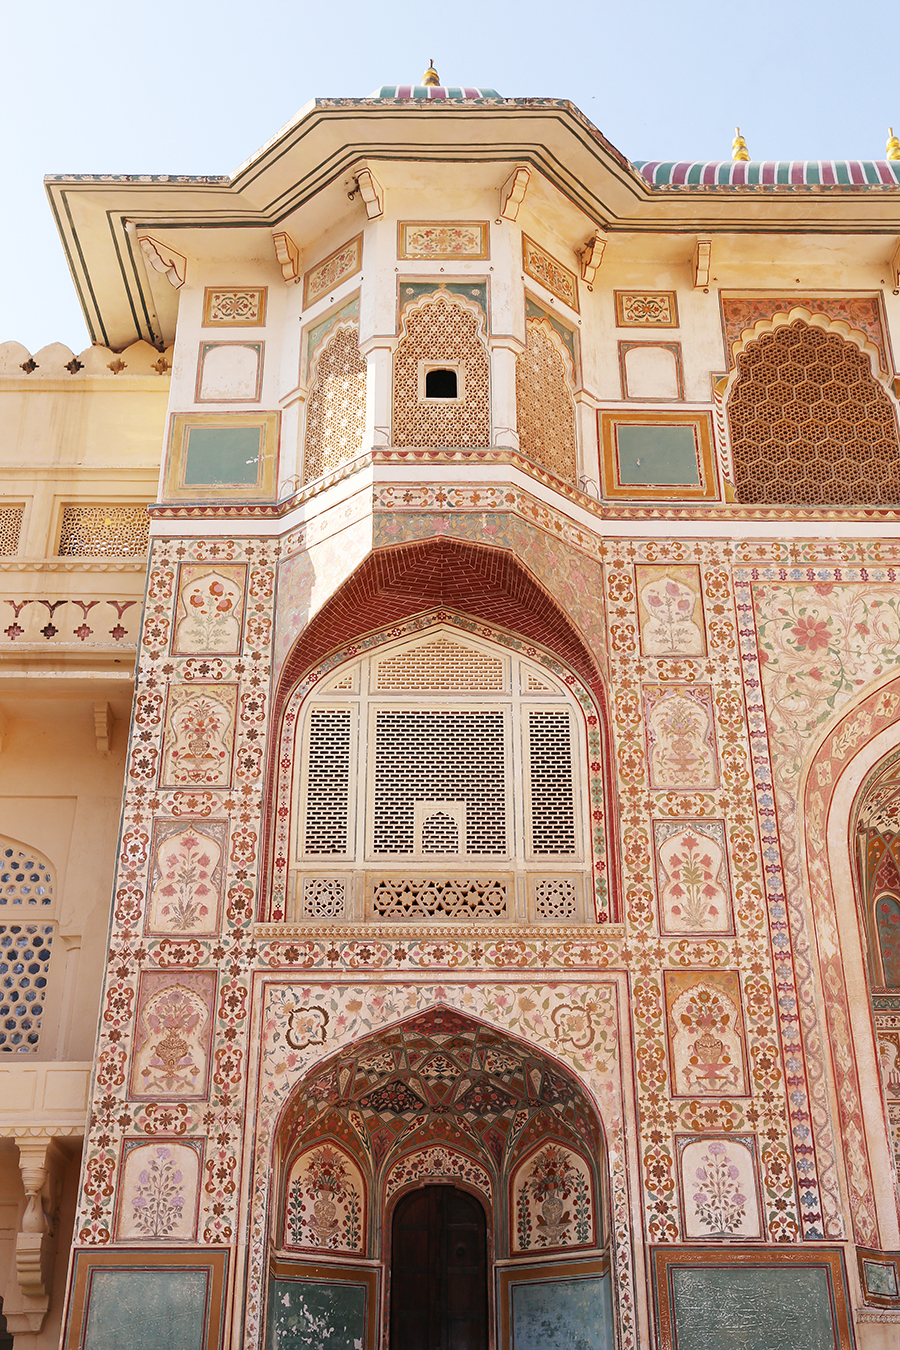 Planning a trip to Jaipur, India? You can't miss Amber Fort (aka Amer Fort), one of Rajasthan's great fortress palaces. Here's everything you need to know before you go.